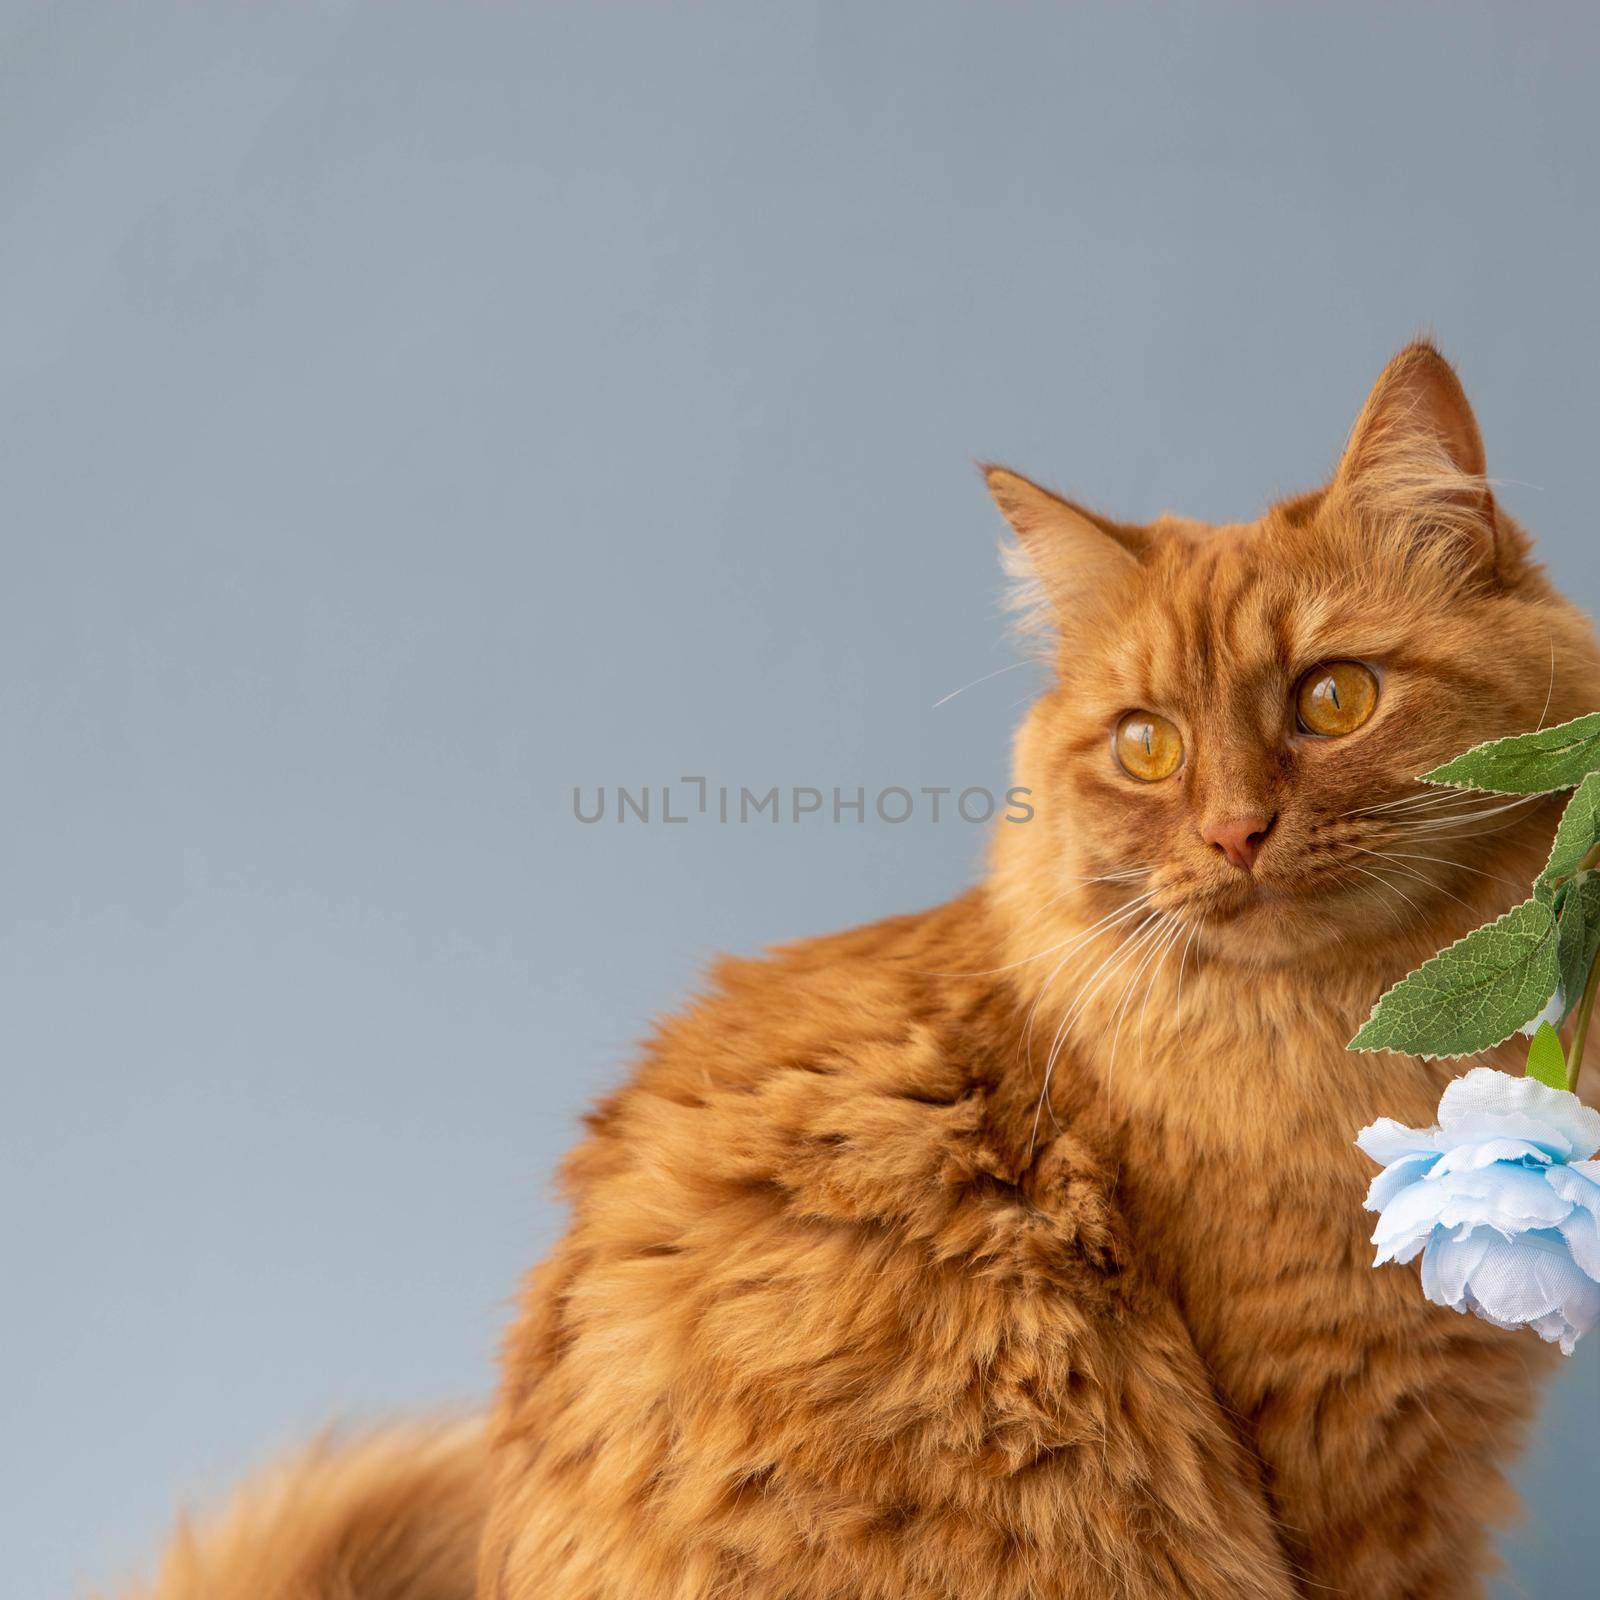 A big red cat looks to the side next to a blue flower on a blue background is a place for text by Serebrova